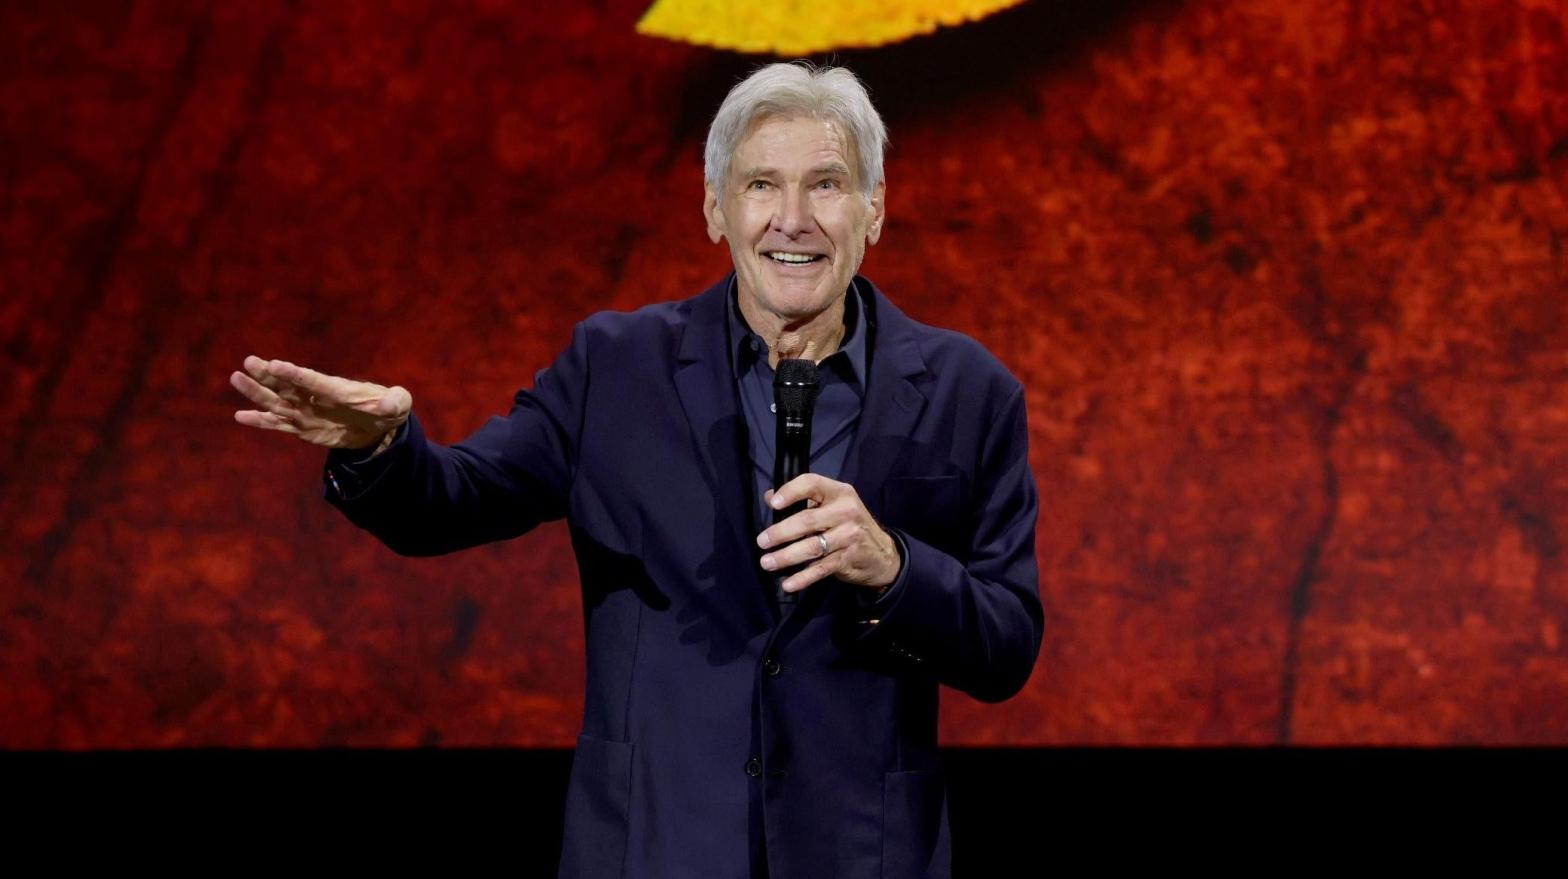 Harrison Ford on stage at the D23 Expo earlier this year. (Image: Walt Disney Company)